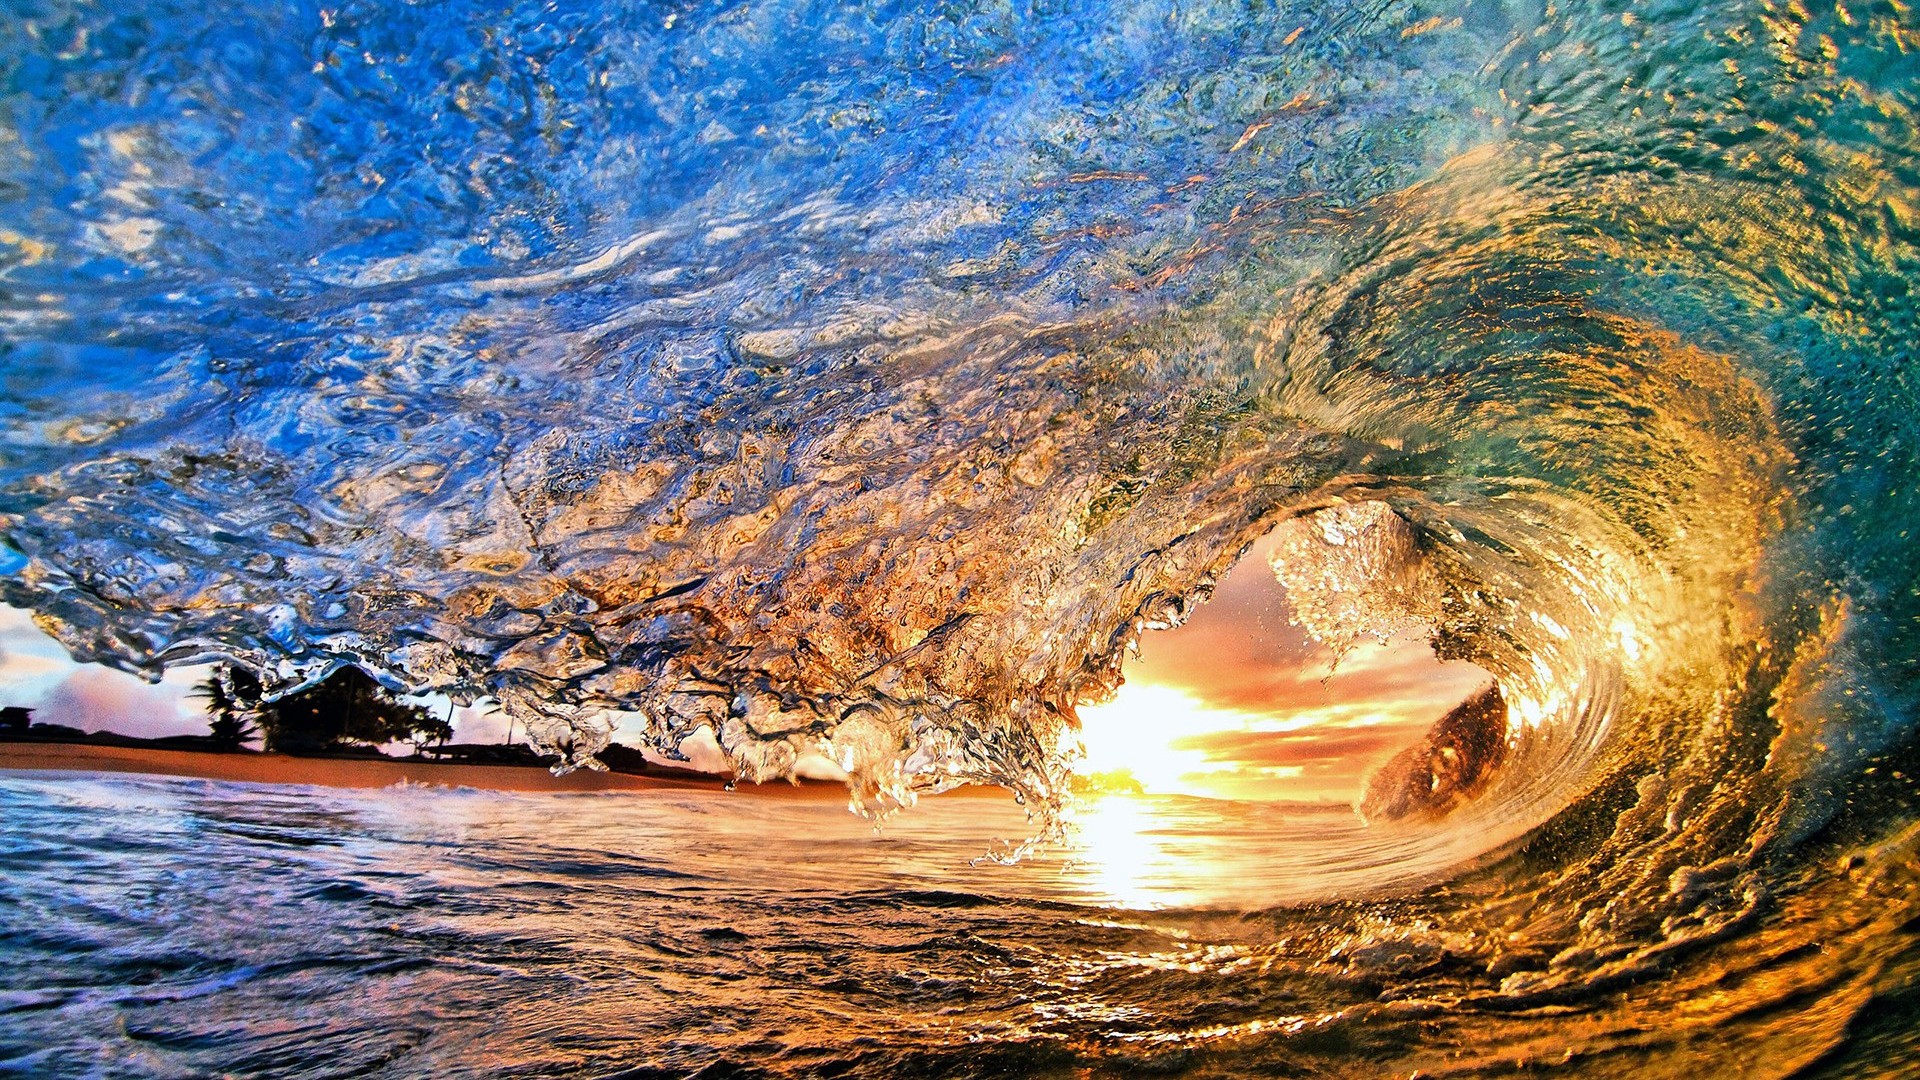 Surfing waves in sunset wallpaper | 1920x1080 | #34916